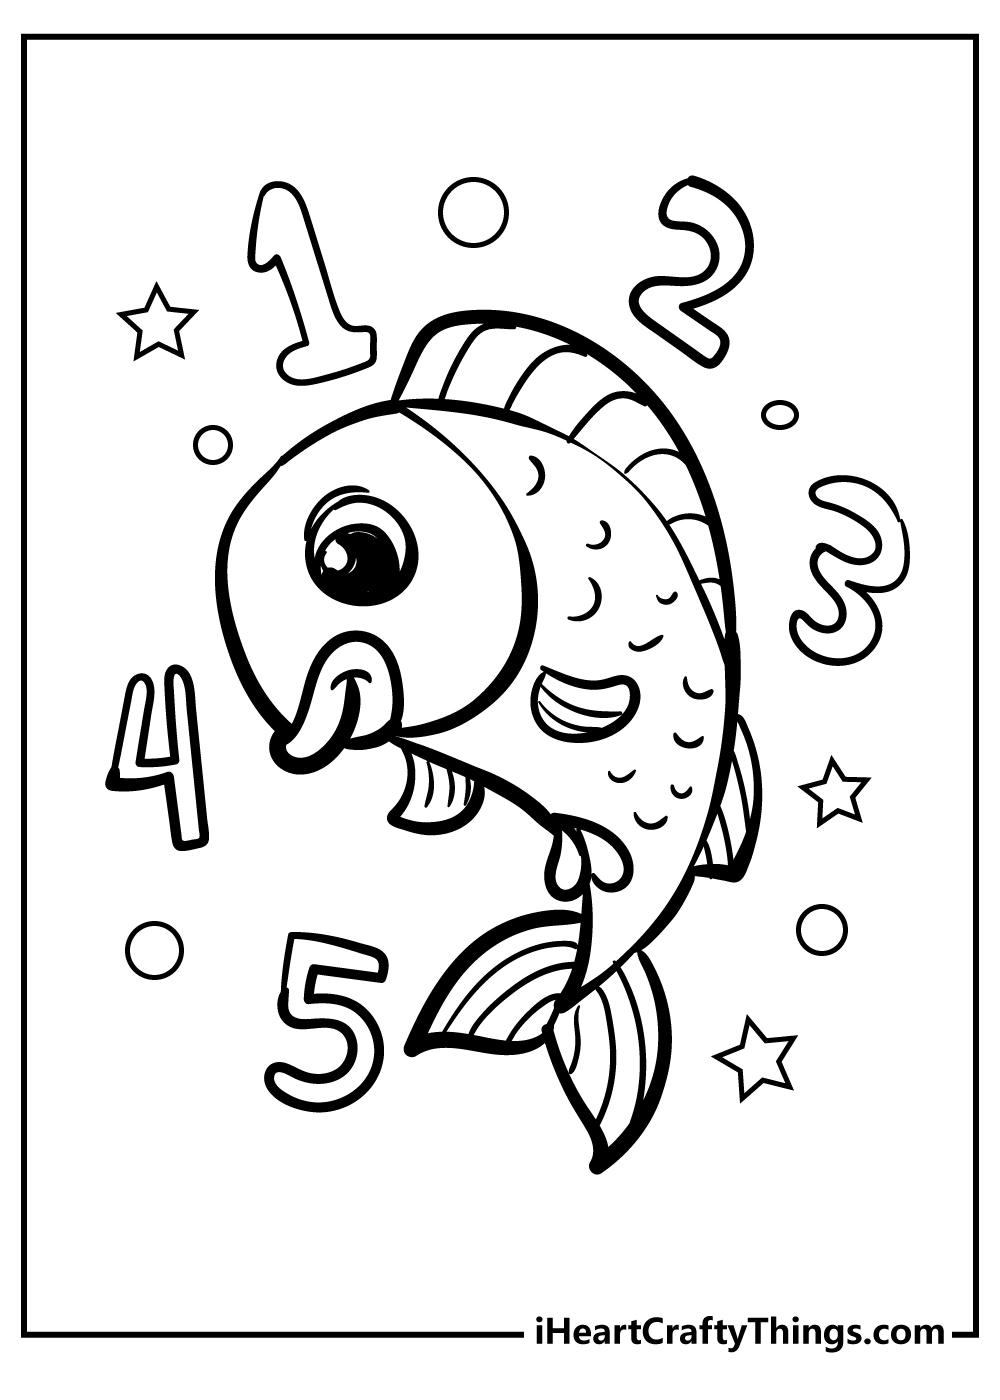 Toddlers Coloring Pages free printable